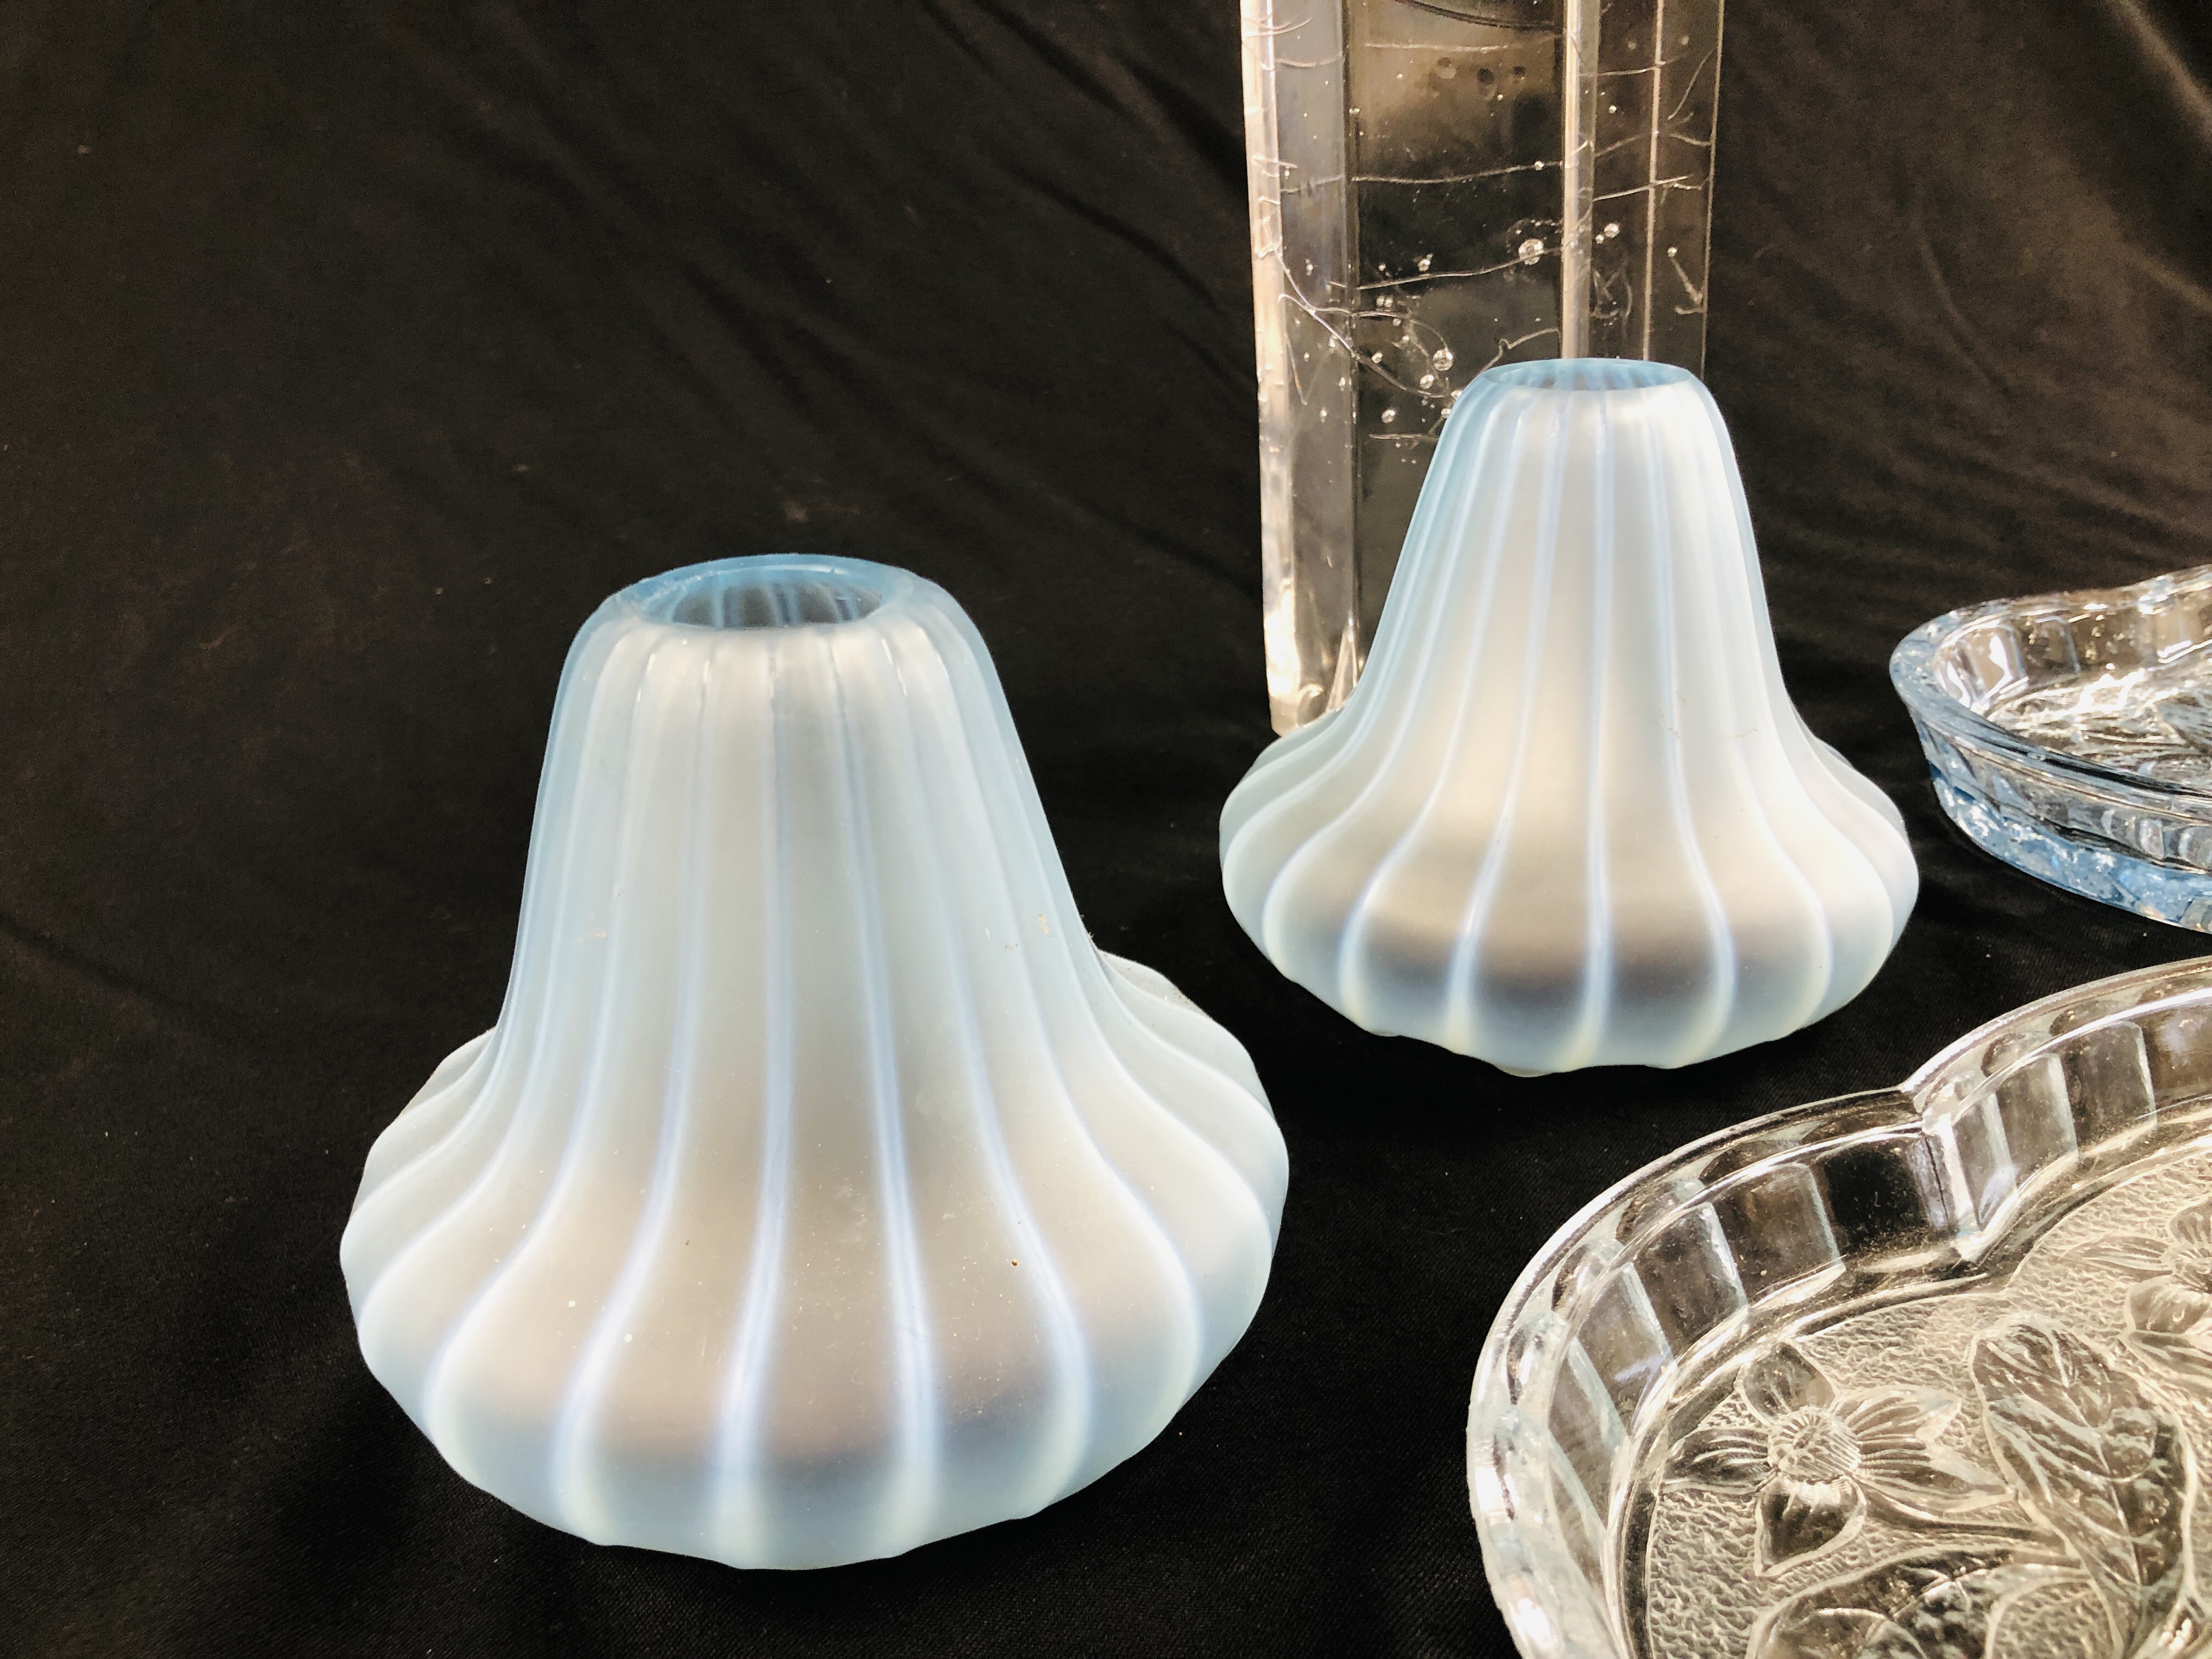 A PAIR OF PALE BLUE GLASS SHADES H 11CM ALONG WITH A PAIR OF ELABORATE BLUE GLASS SHAPED DRESSING - Image 4 of 7